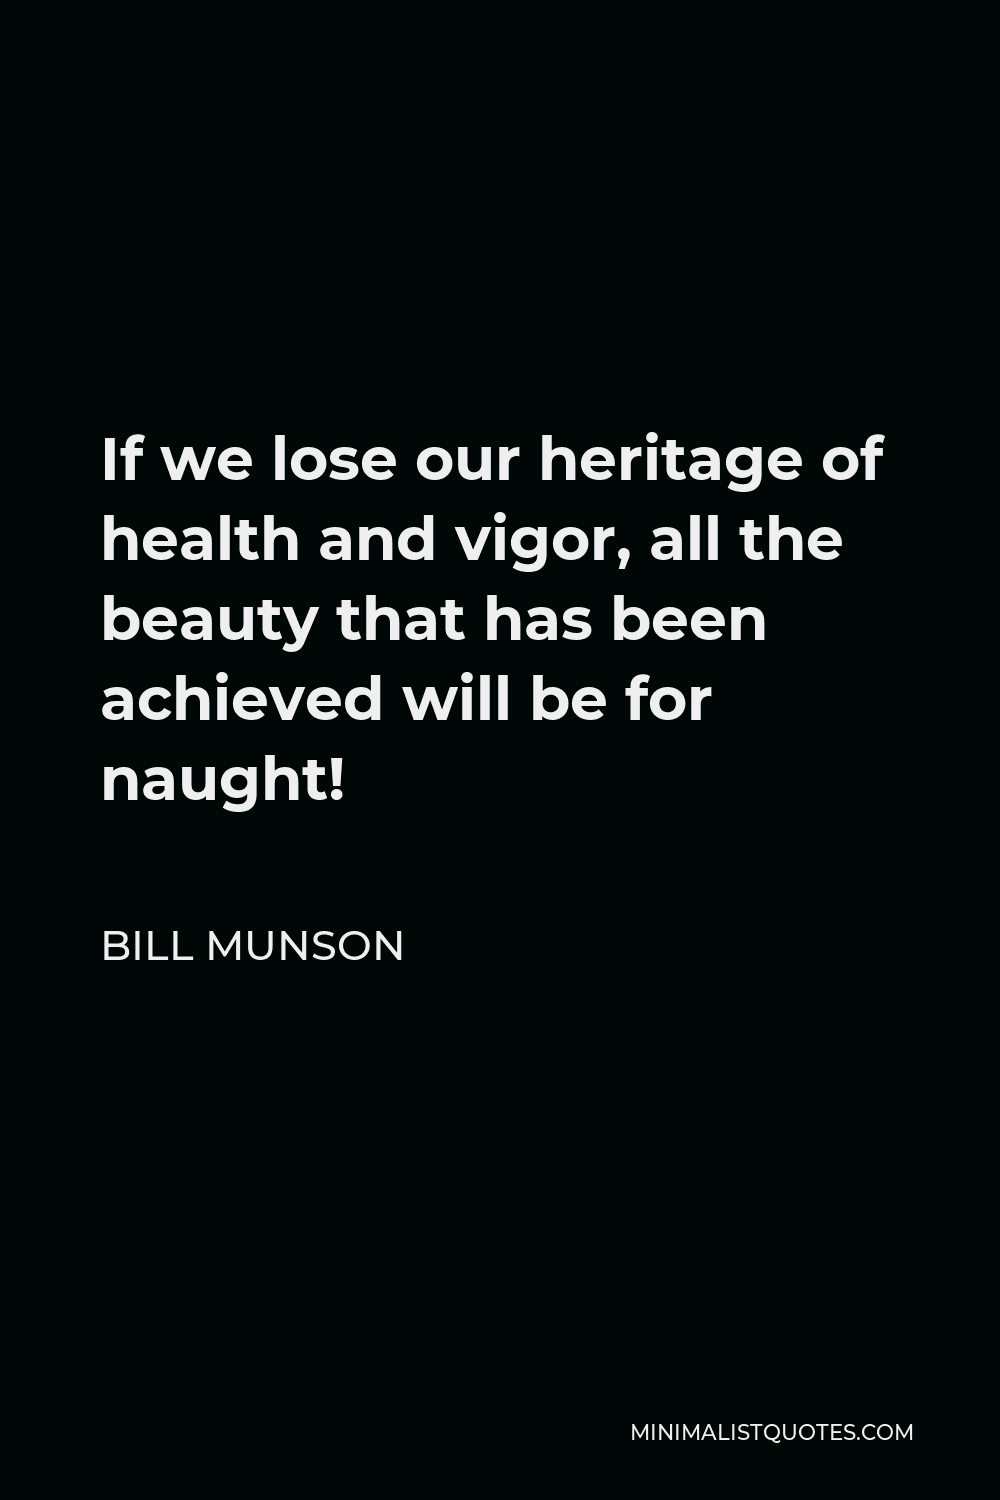 Bill Munson Quote - If we lose our heritage of health and vigor, all the beauty that has been achieved will be for naught!